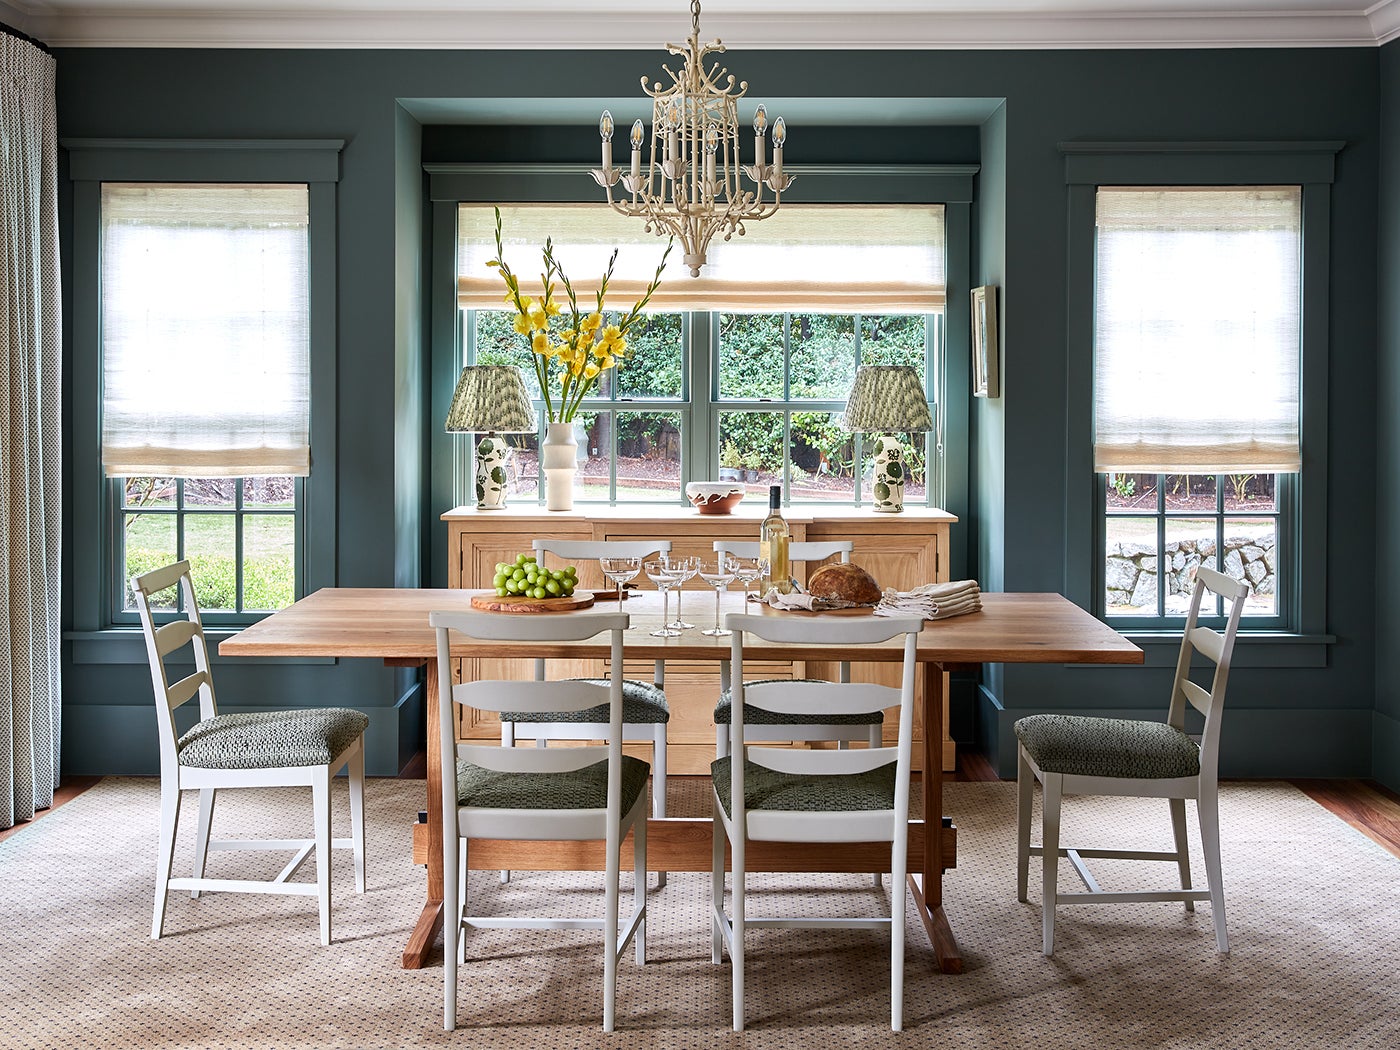 Formal dining room with green walls